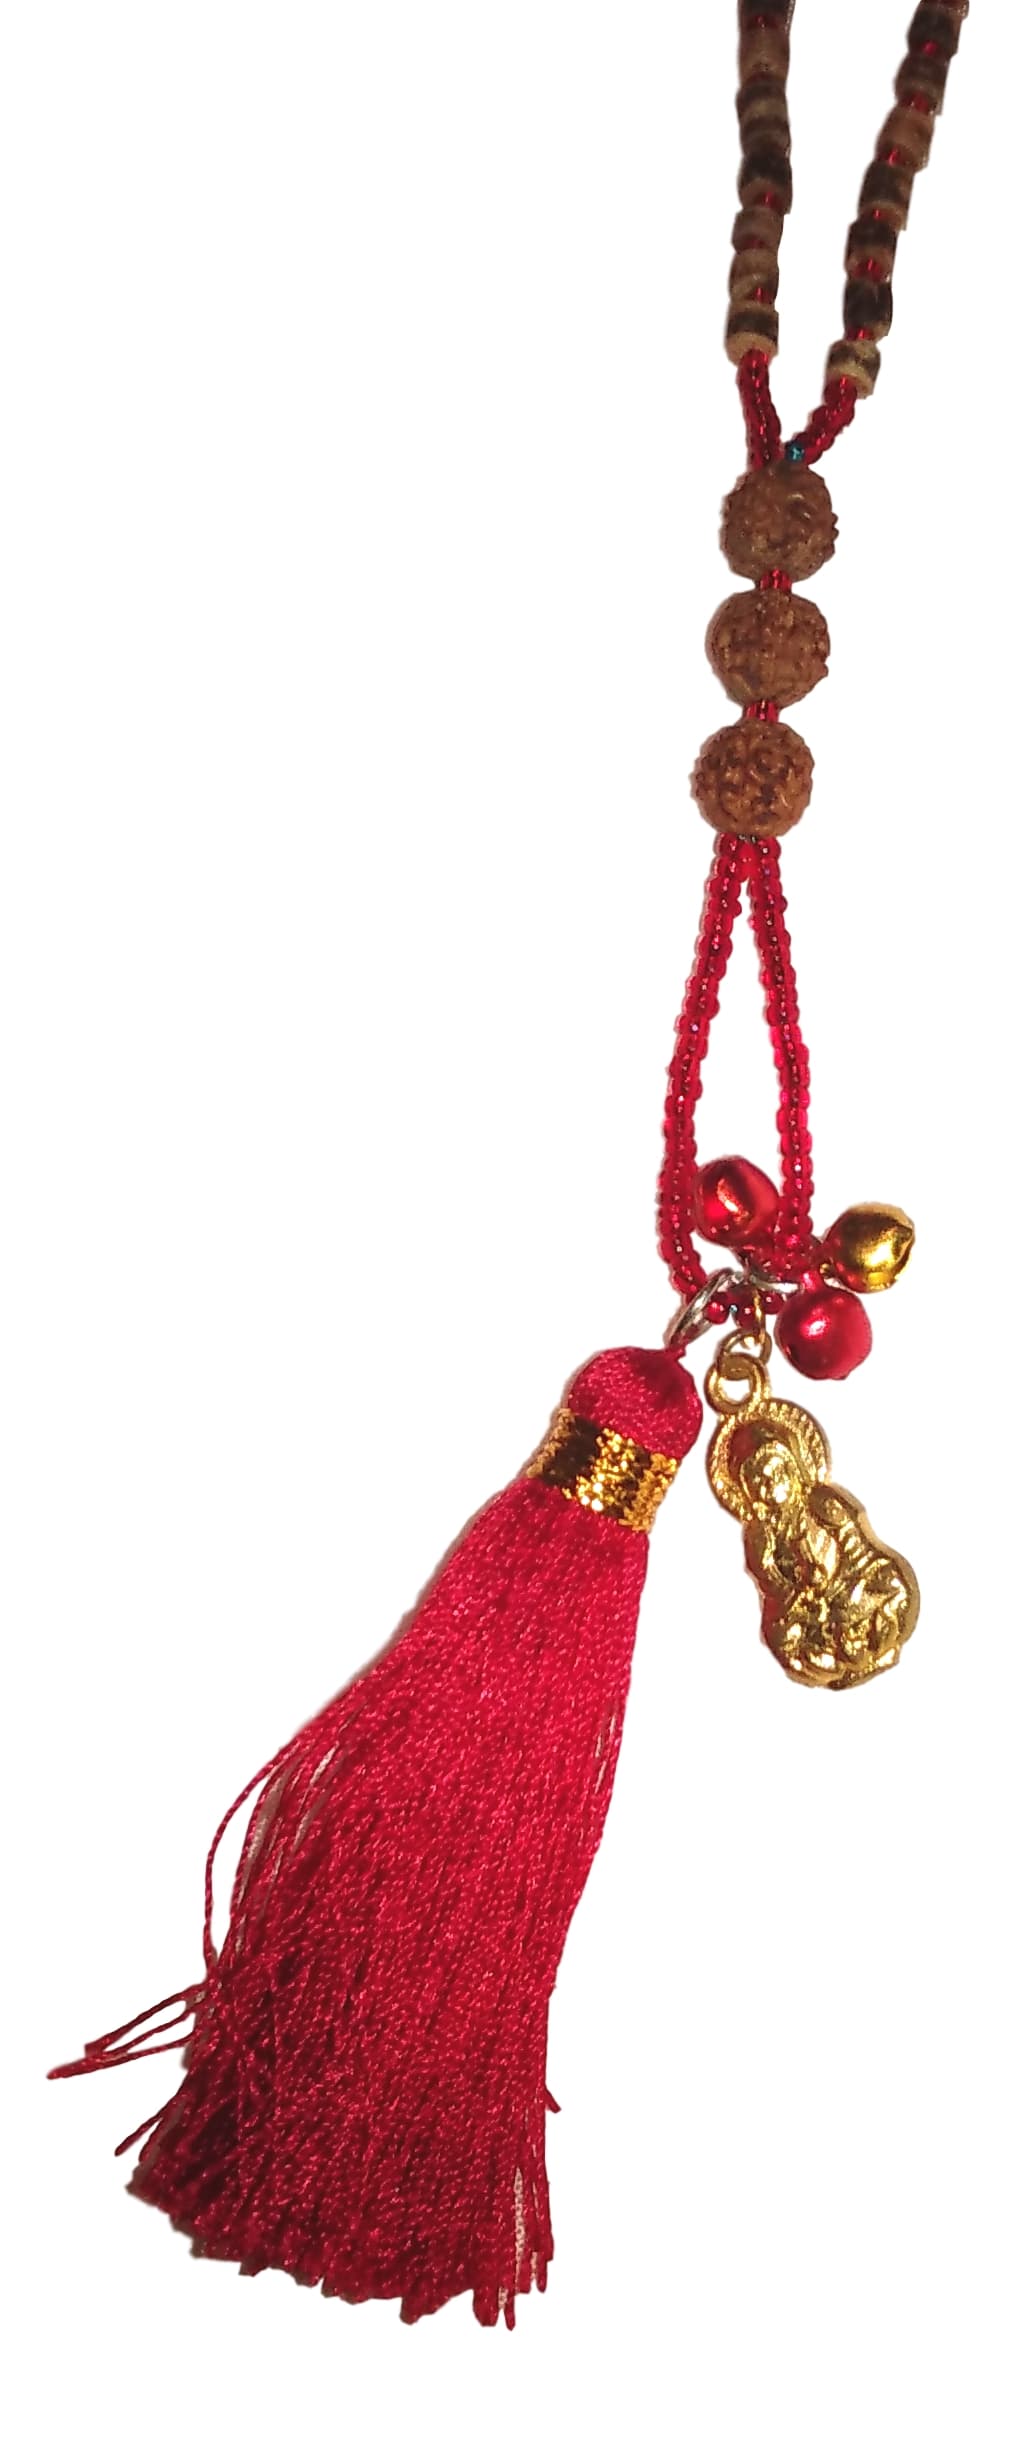 Jewelry - Mala Necklace with Budha, Bells, and Tassel - Red